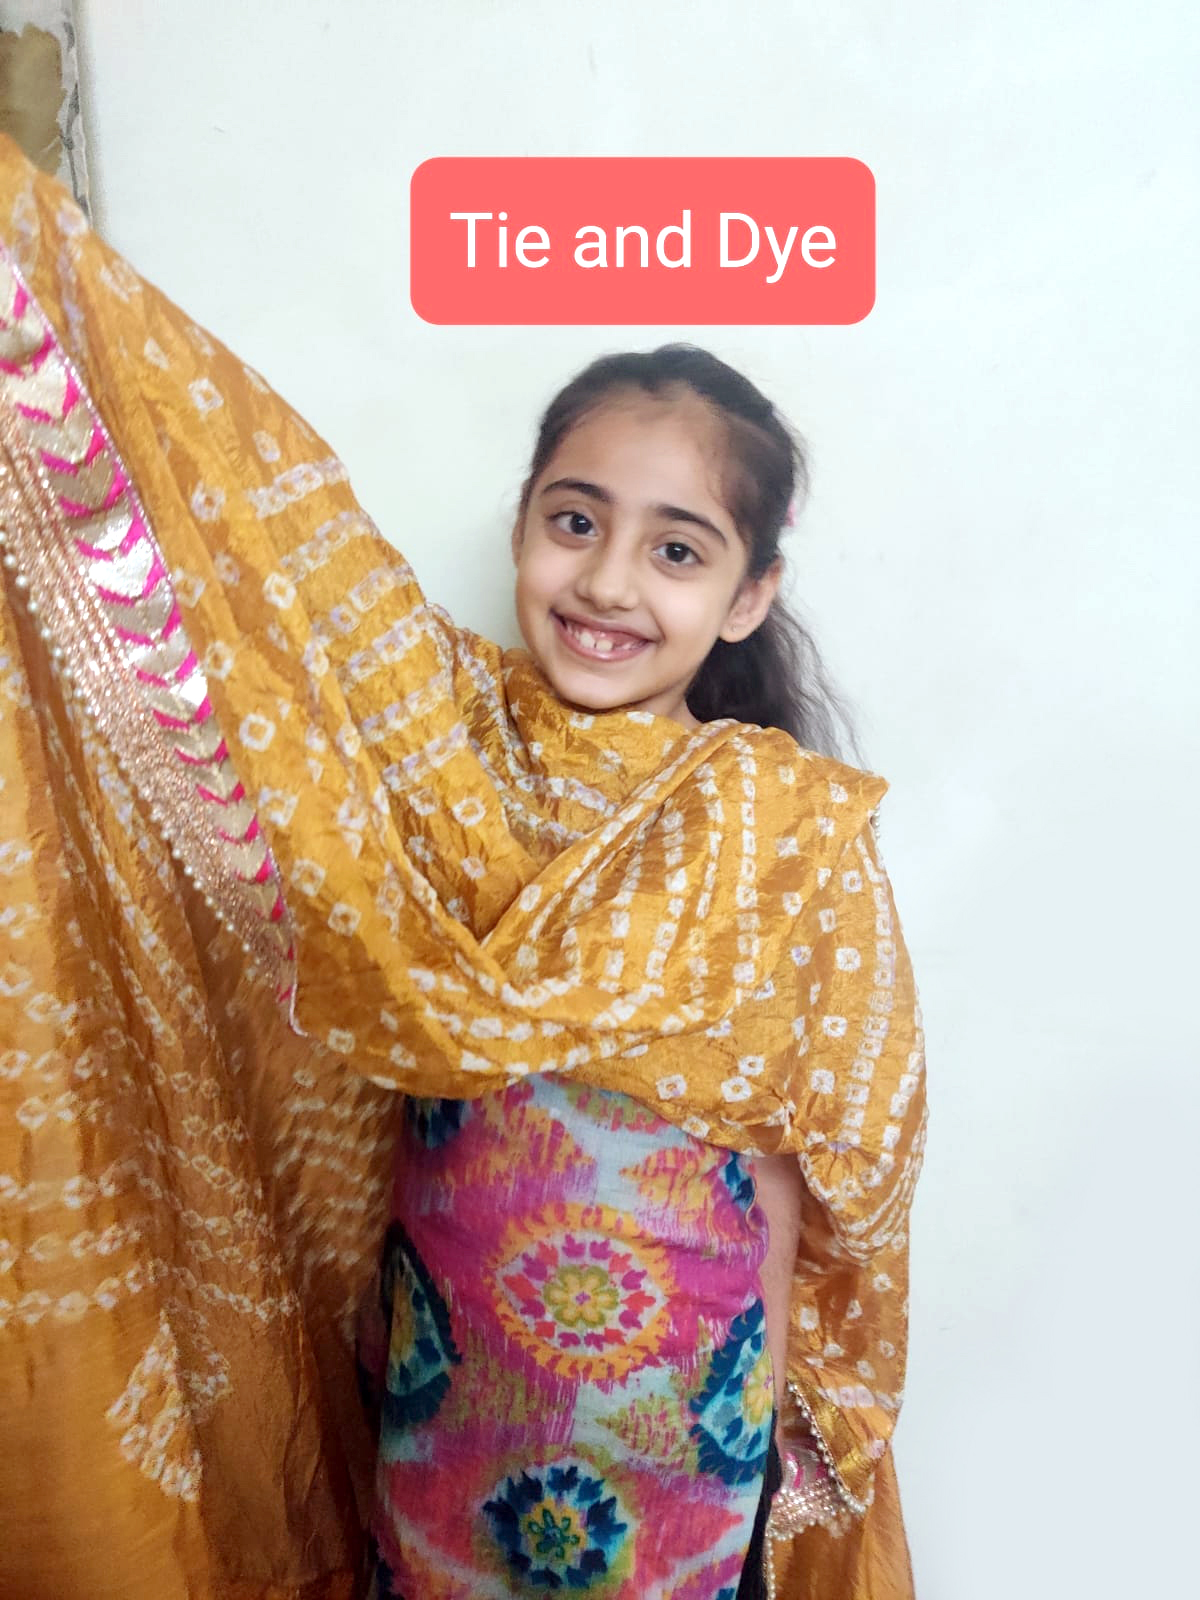 Presidium Dwarka-6, STUDENTS LEARN ABOUT THE DIFFERENT PATTERNS IN CLOTHES